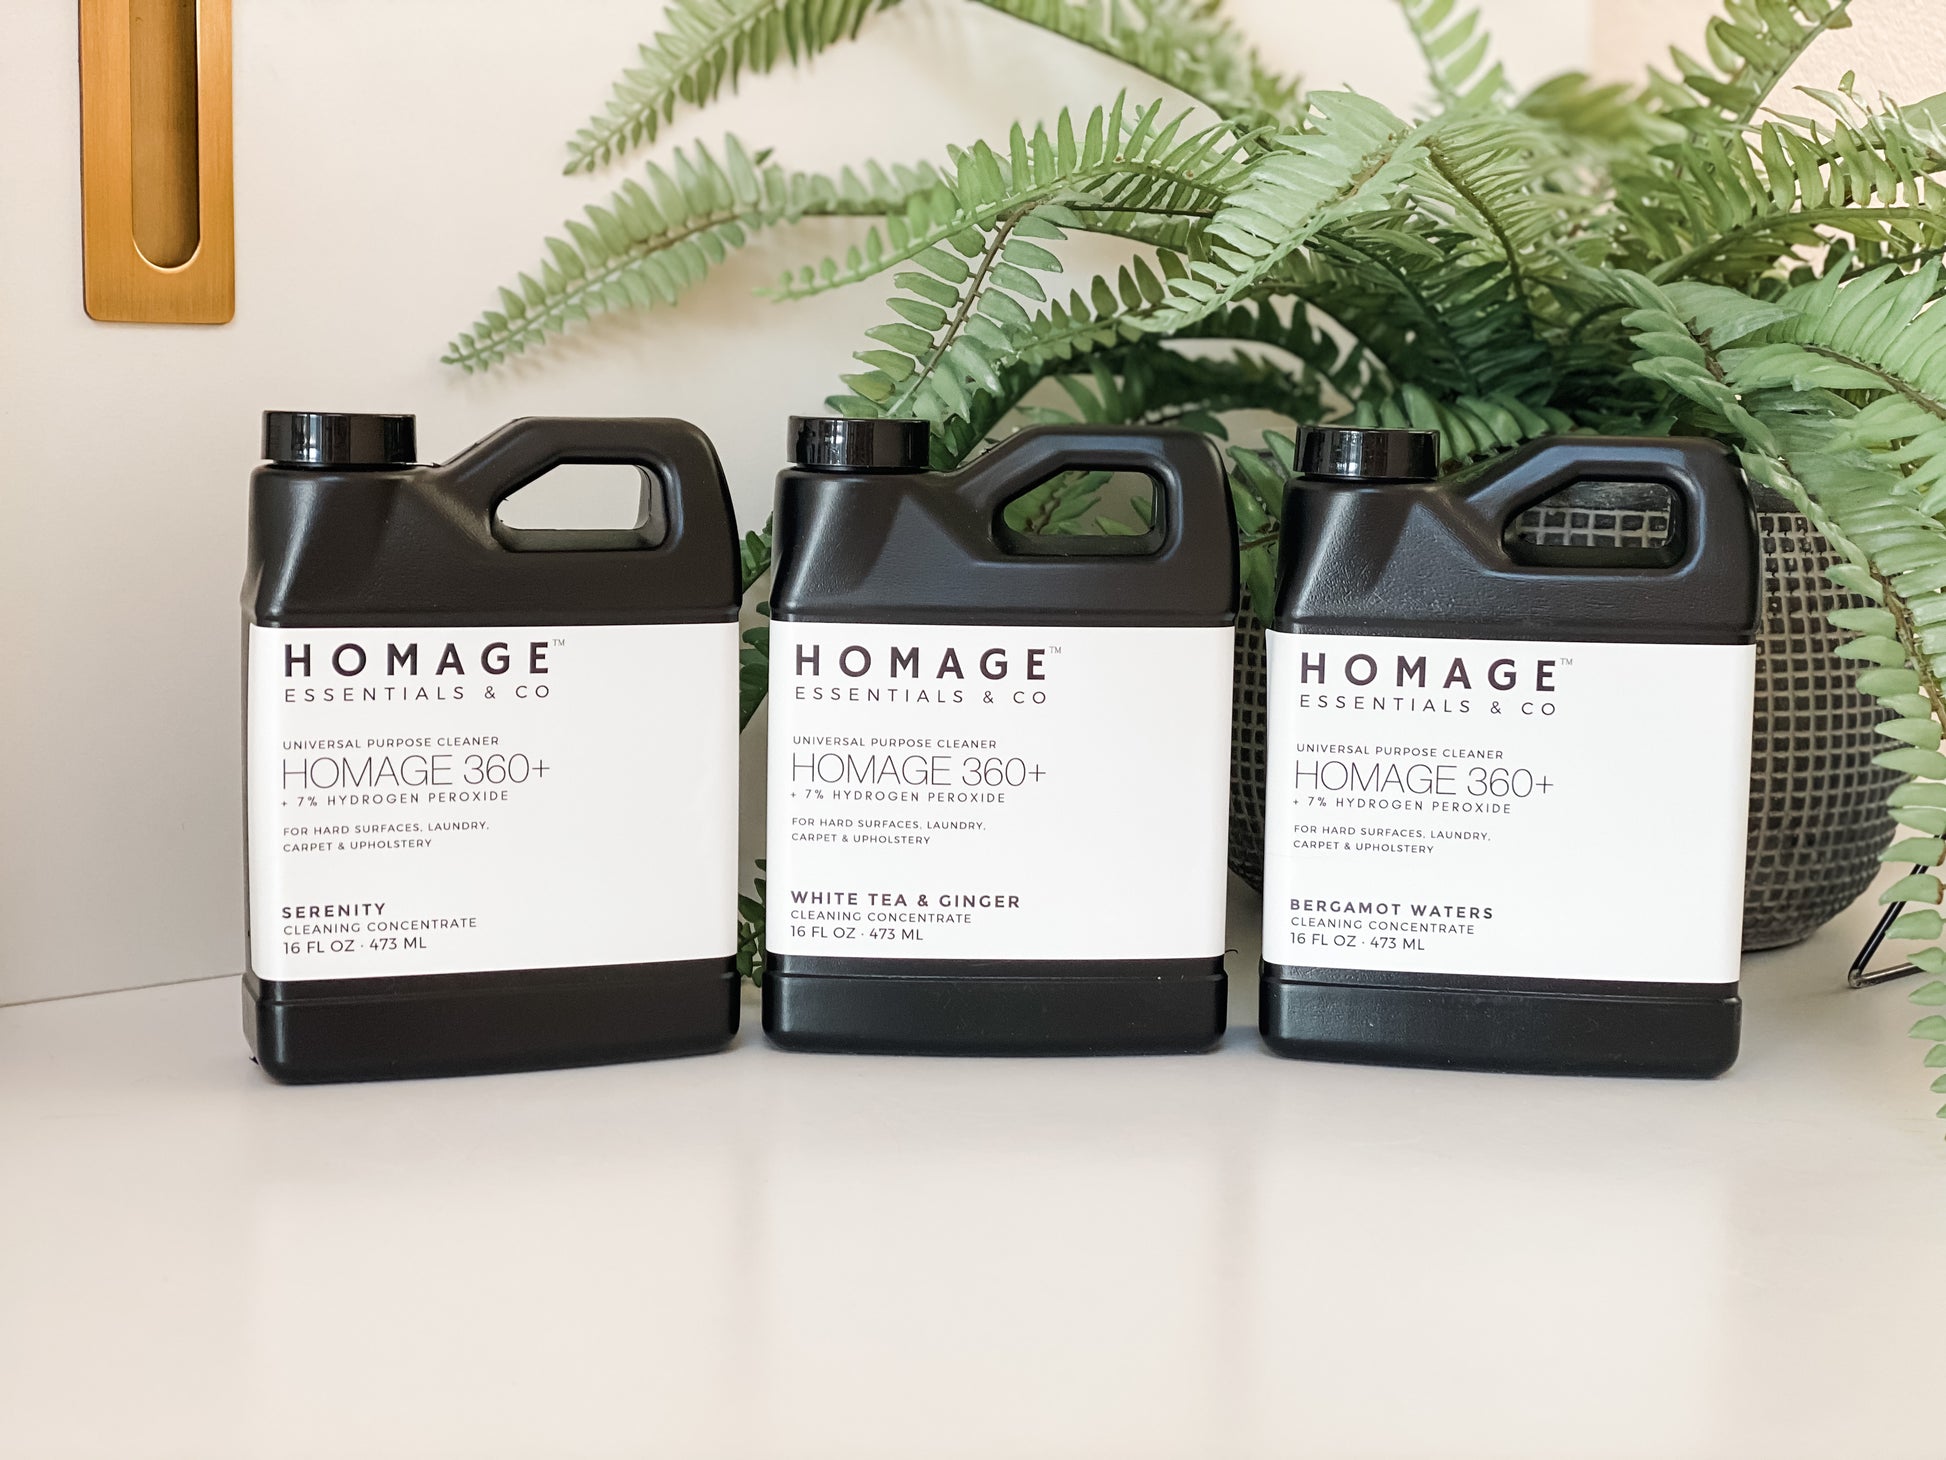 Homage 360+ 7% Hydrogen Peroxide Cleaner Concentrate 16oz - 3 Pack - Homage Essentials & Co